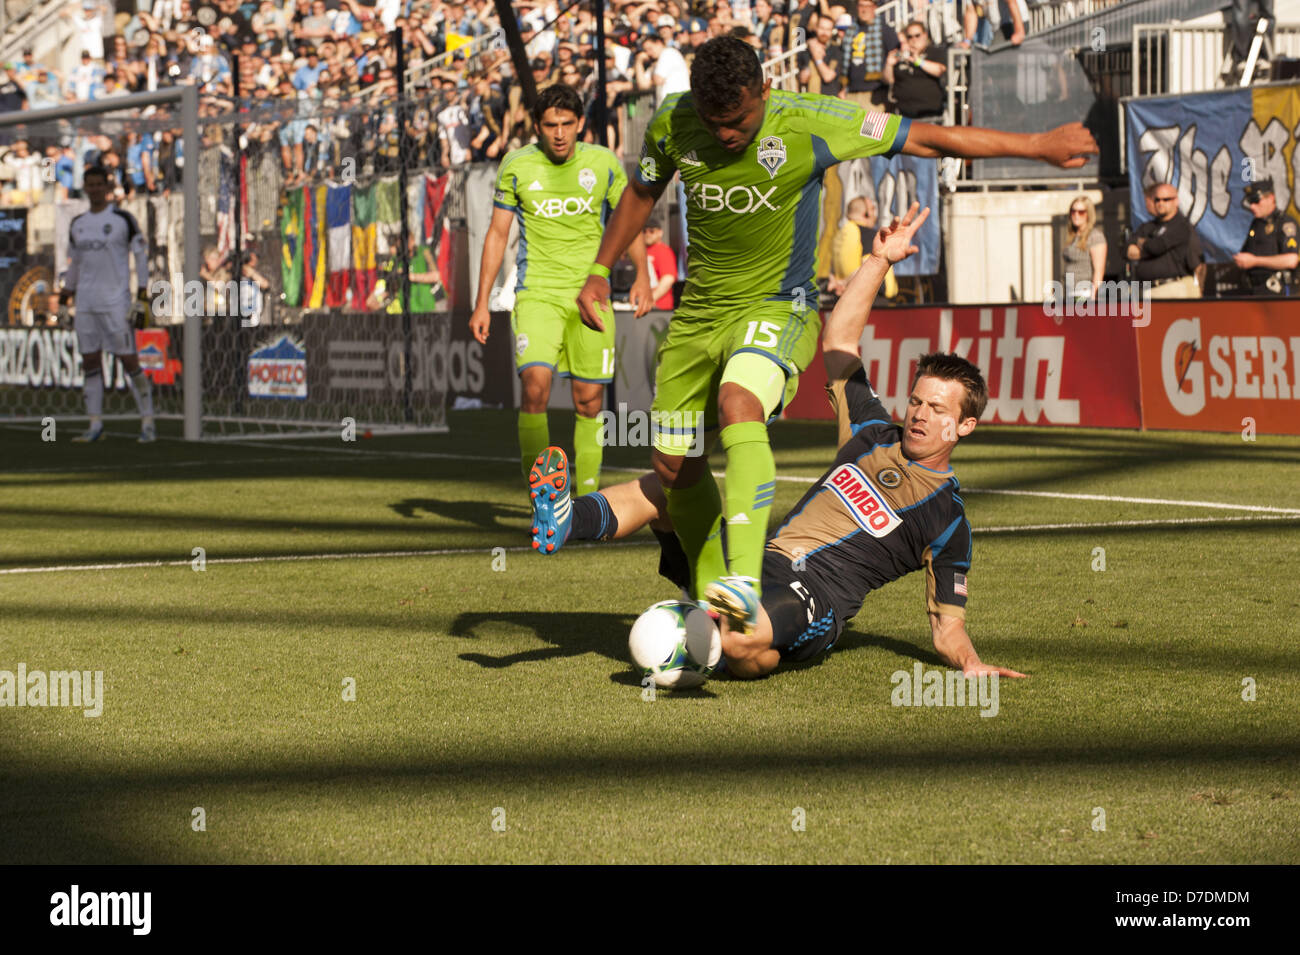 Chester, Pennsylvania, USA. 4th May, 2013. Seattle Sounders, MARIO MARTINEZ (15) takes the ball away from Philadelphia Union's ANTOINE HOPPENOT (29). The Union and the Sounders played to a 2-2 draw at the Unions home field, PPL Park (Credit Image: © Ricky Fitchett/ZUMAPRESS.com) Stock Photo